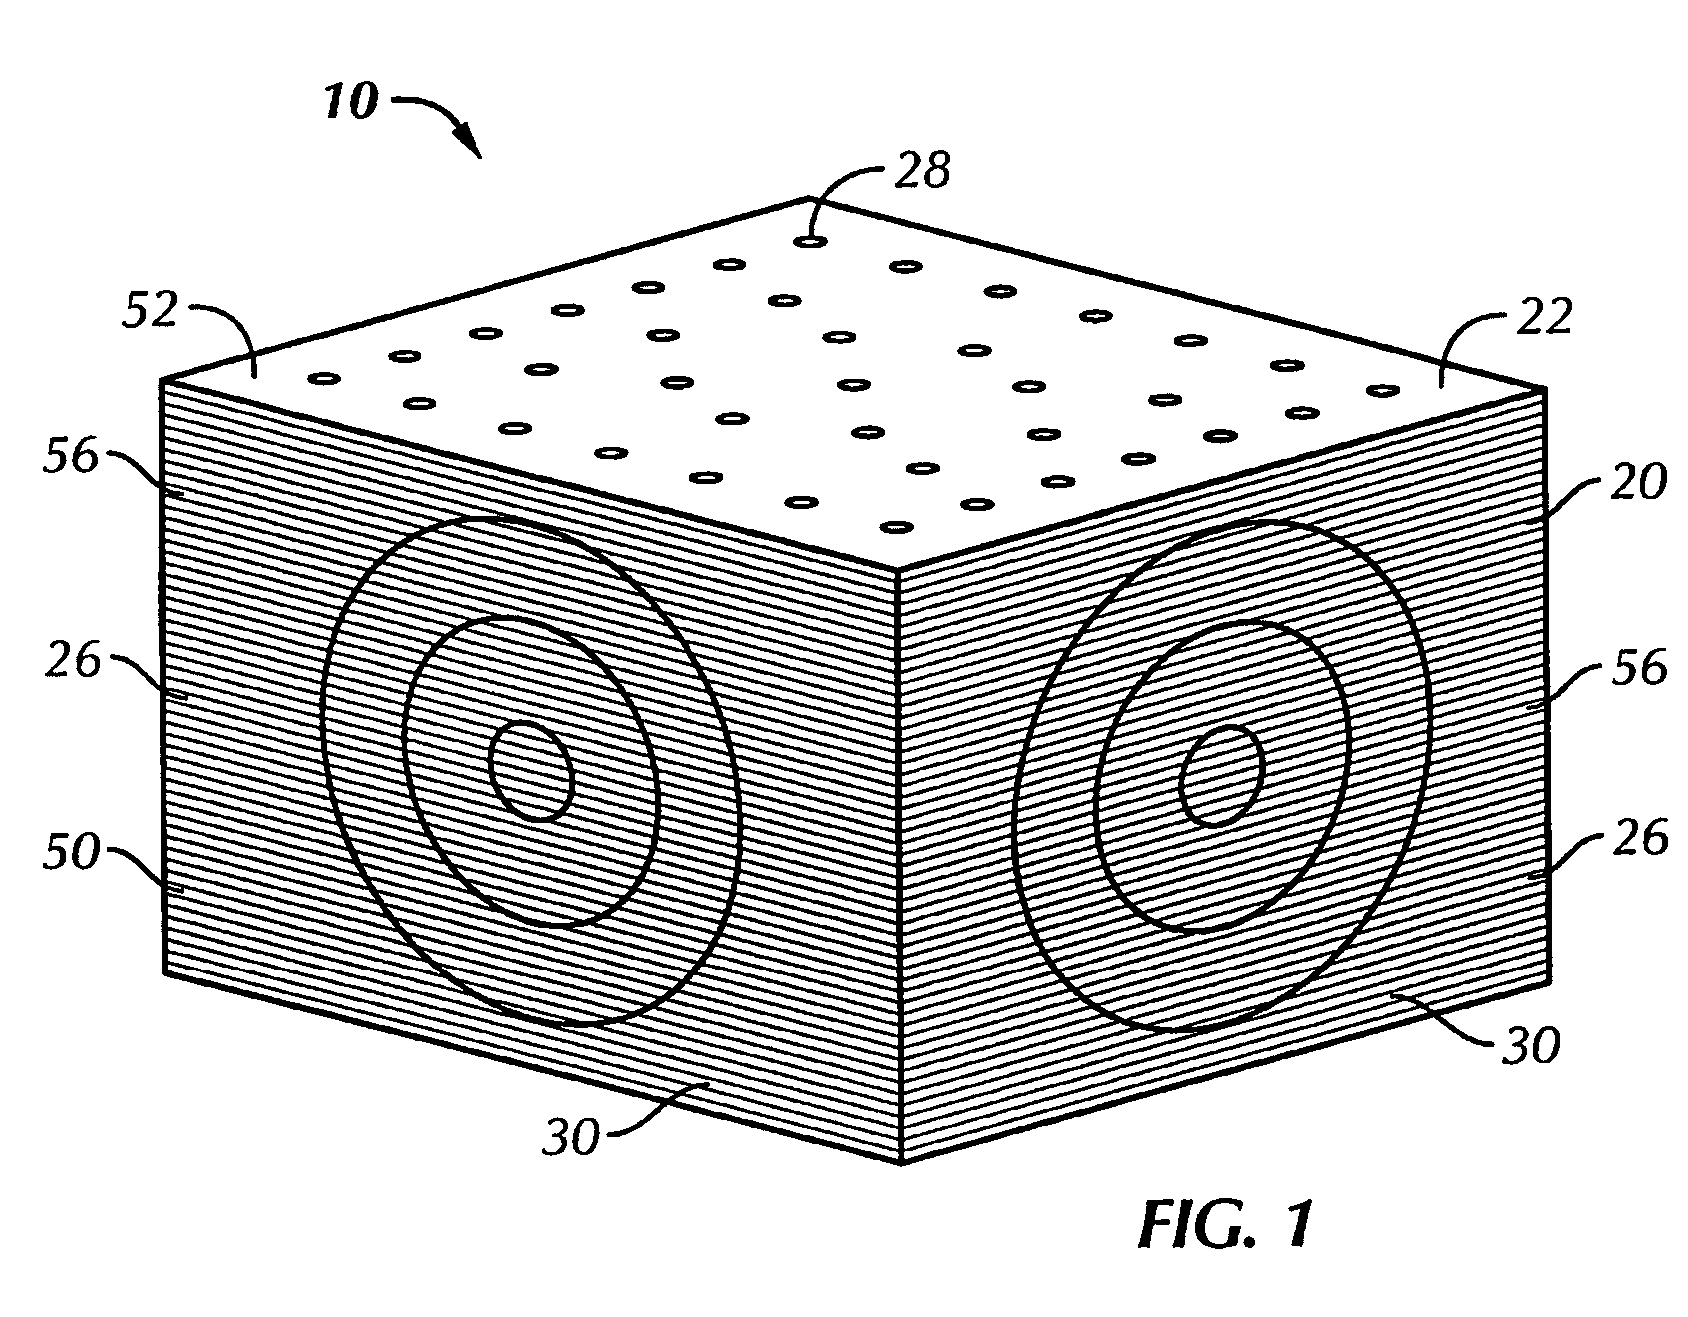 Layered foam target and method of manufacturing the same